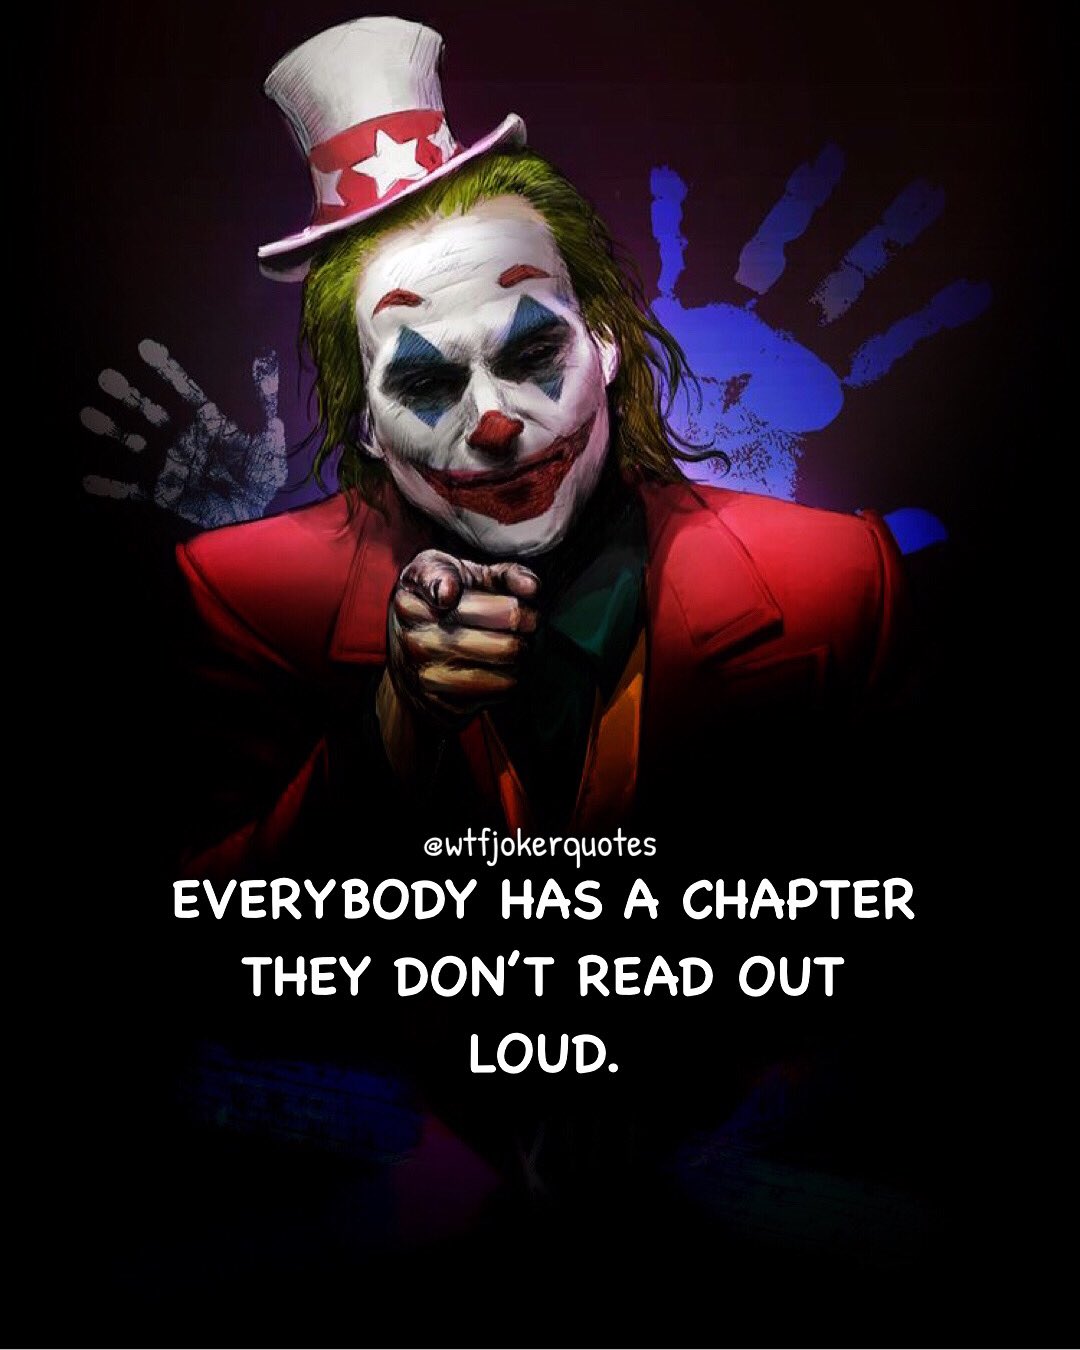 Joker S Quotes Everybody Has A Chapter They Don T Read Out Loud Quote Quotes T Co J53vfe96ro Twitter